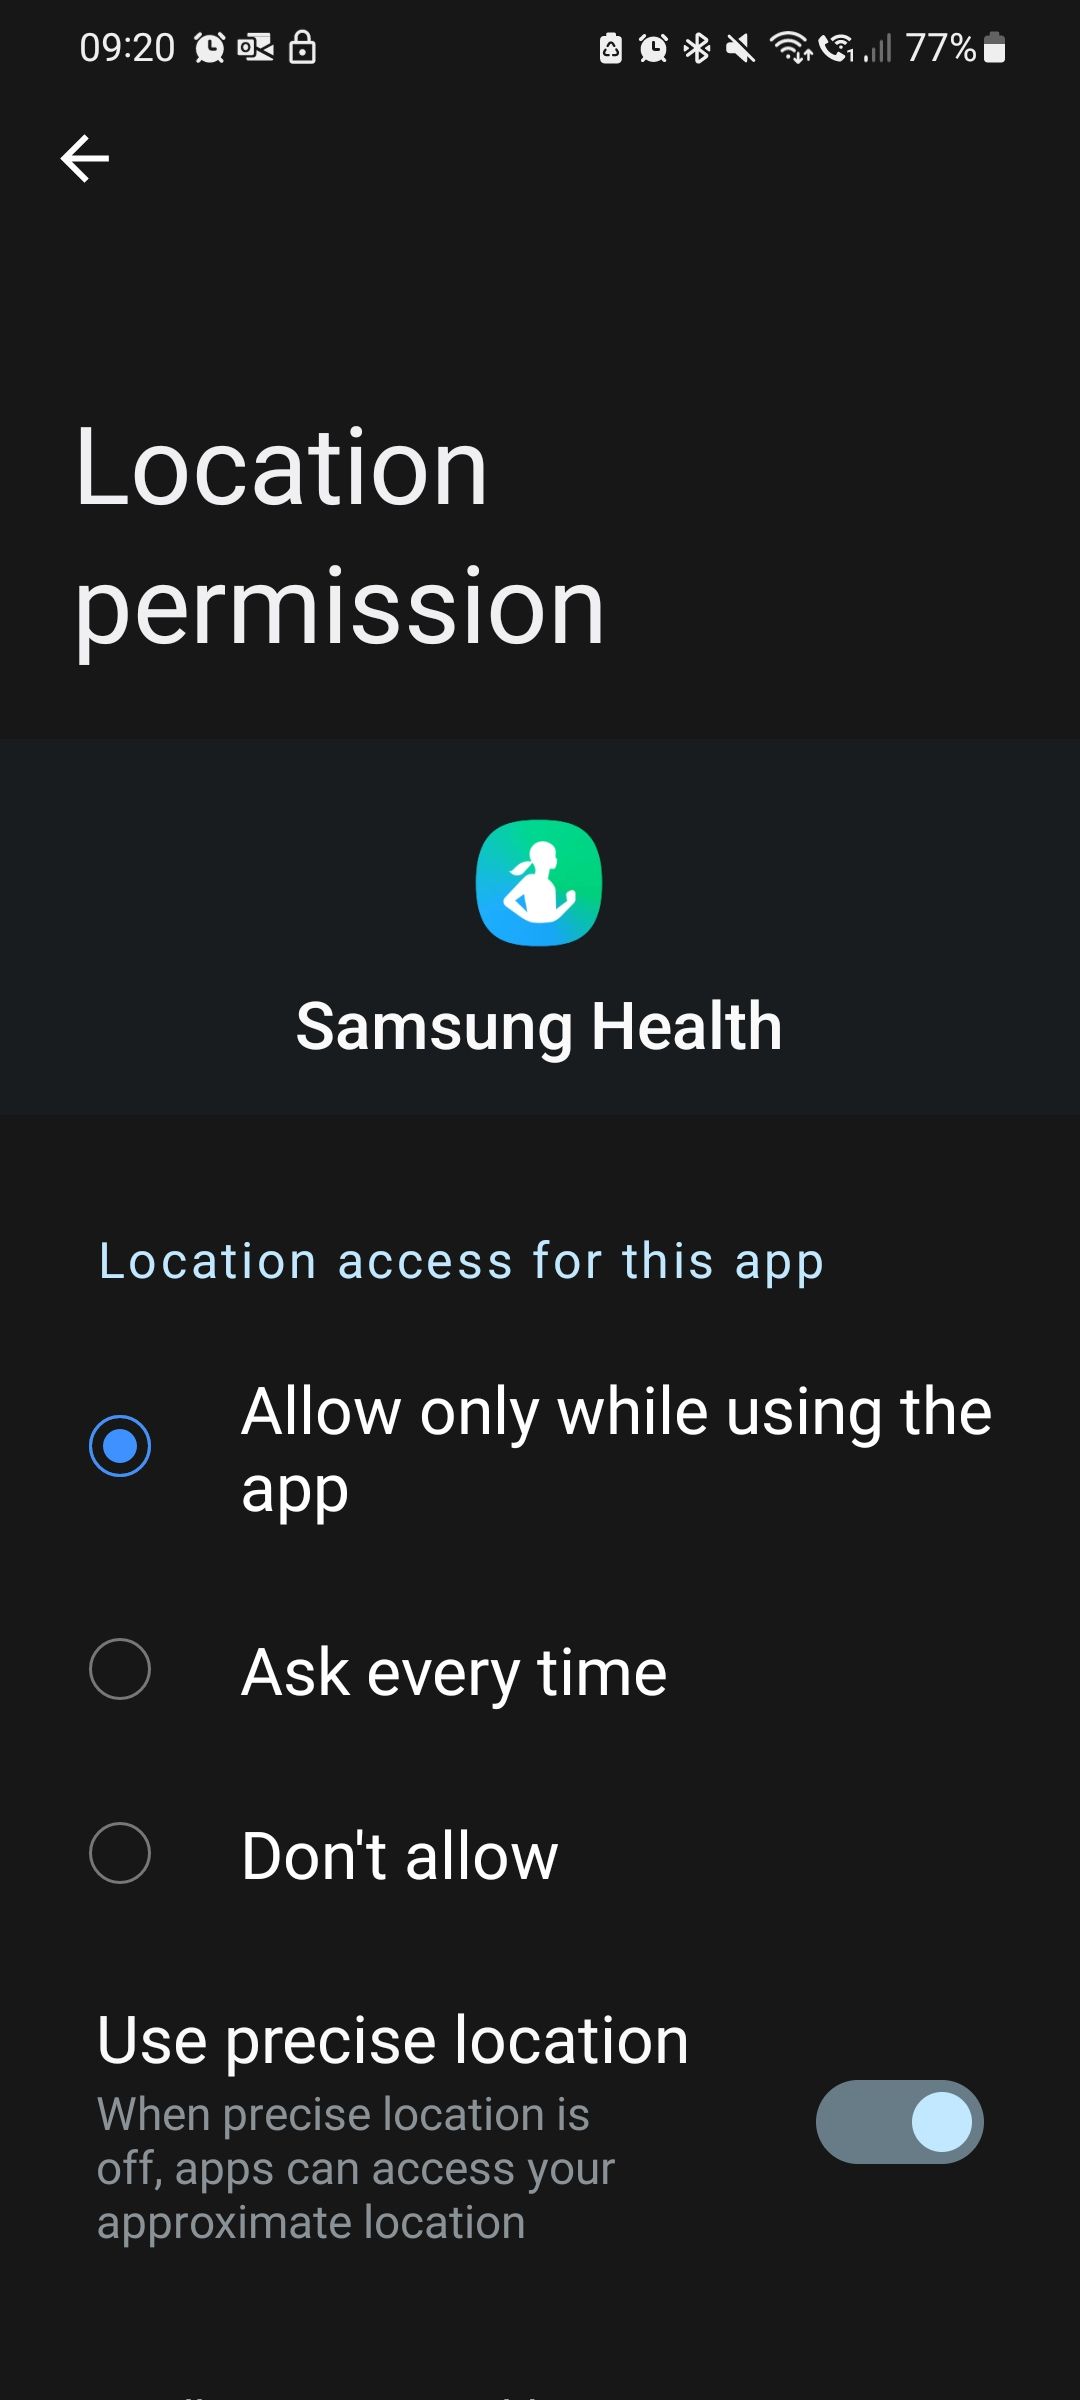 Samsung Health removed Map Activity Tracking? - Samsung Community